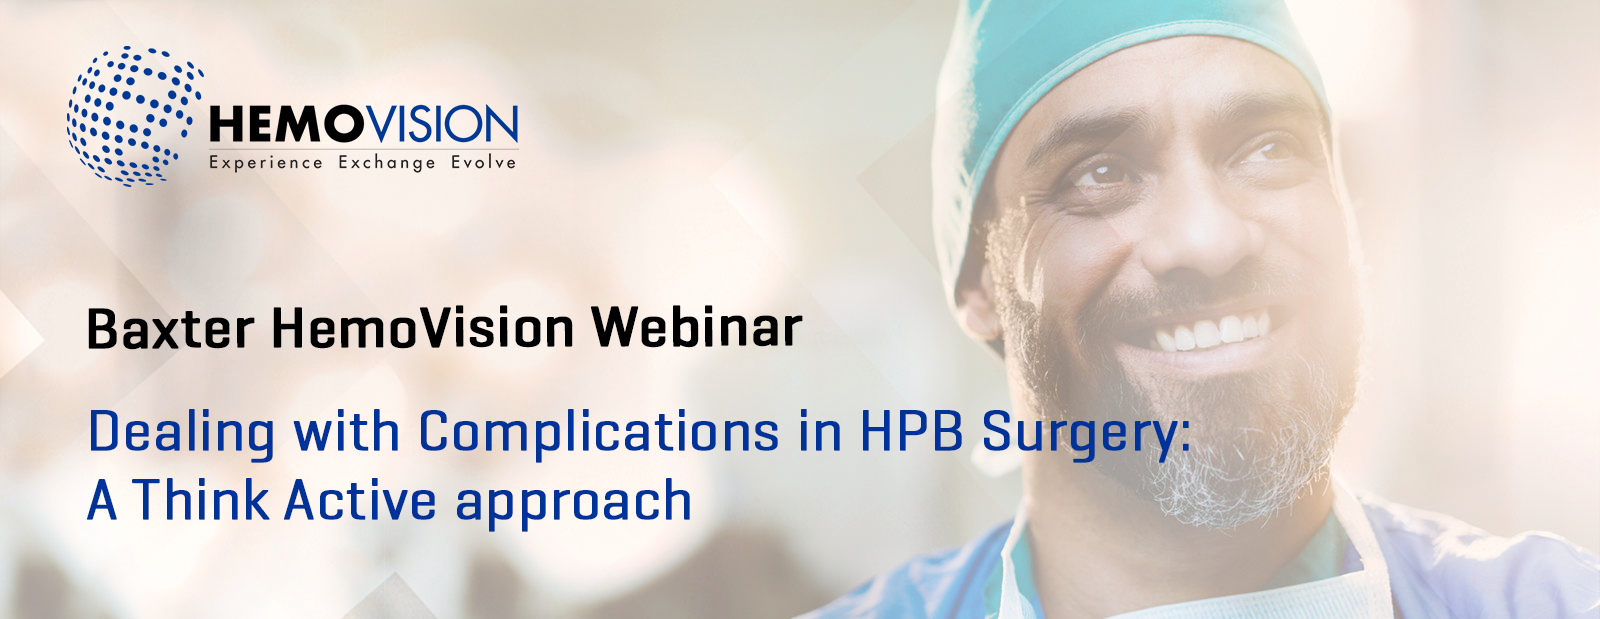 Dealing with Complications in HPB Surgery: A Think Active approach